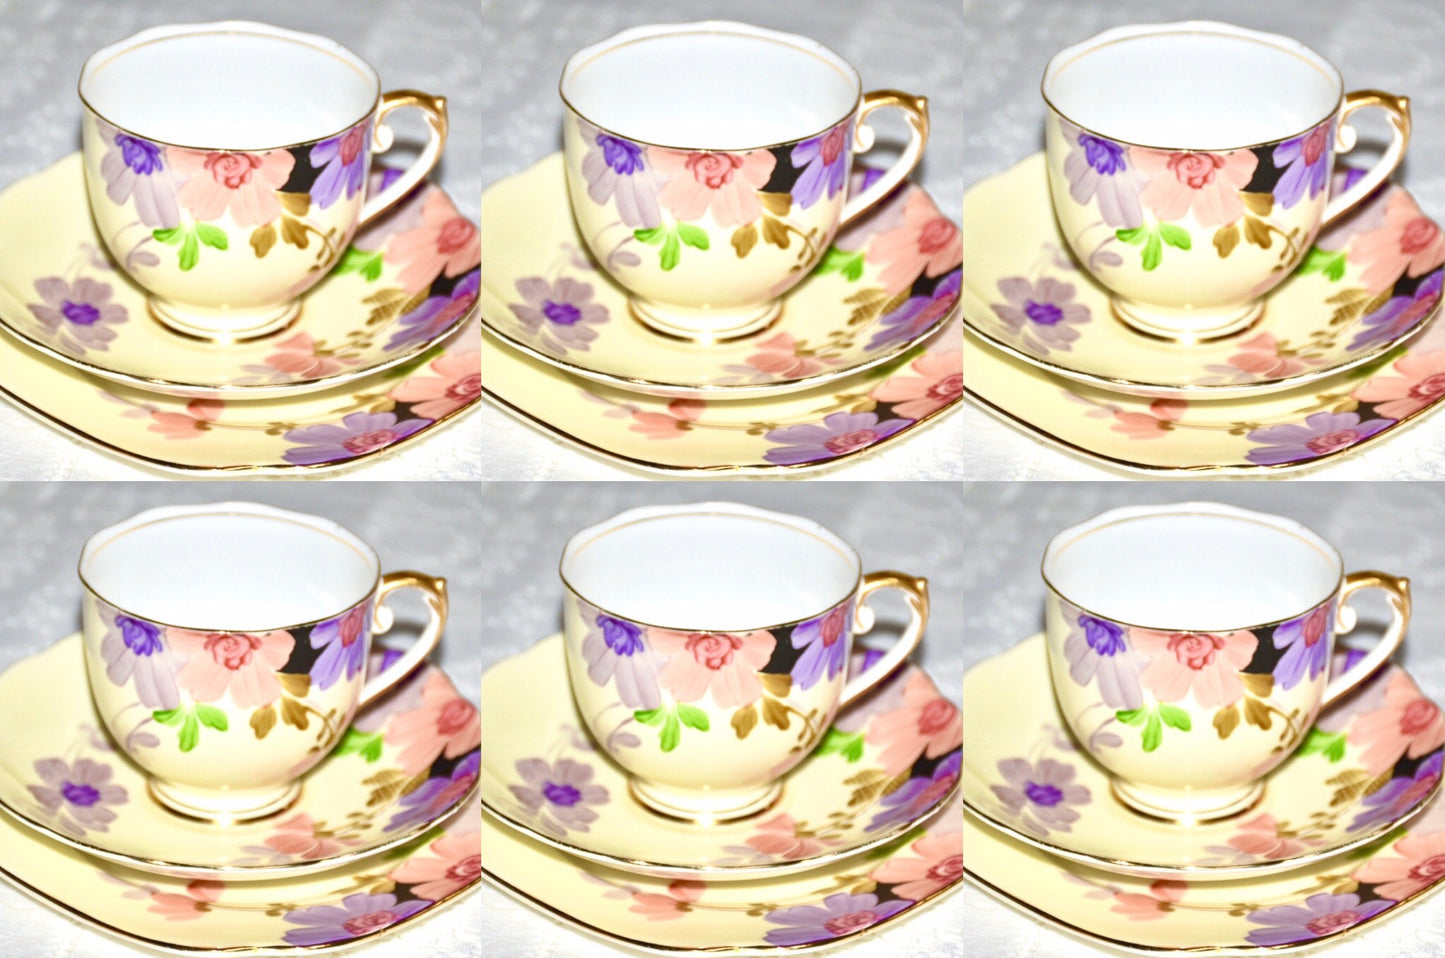 Roslyn Vintage English fine bone china a tea set for 6 people for afternoon tea.  Pink and purple flowers.  Matching tea cups saucers and tea plates with gold trim